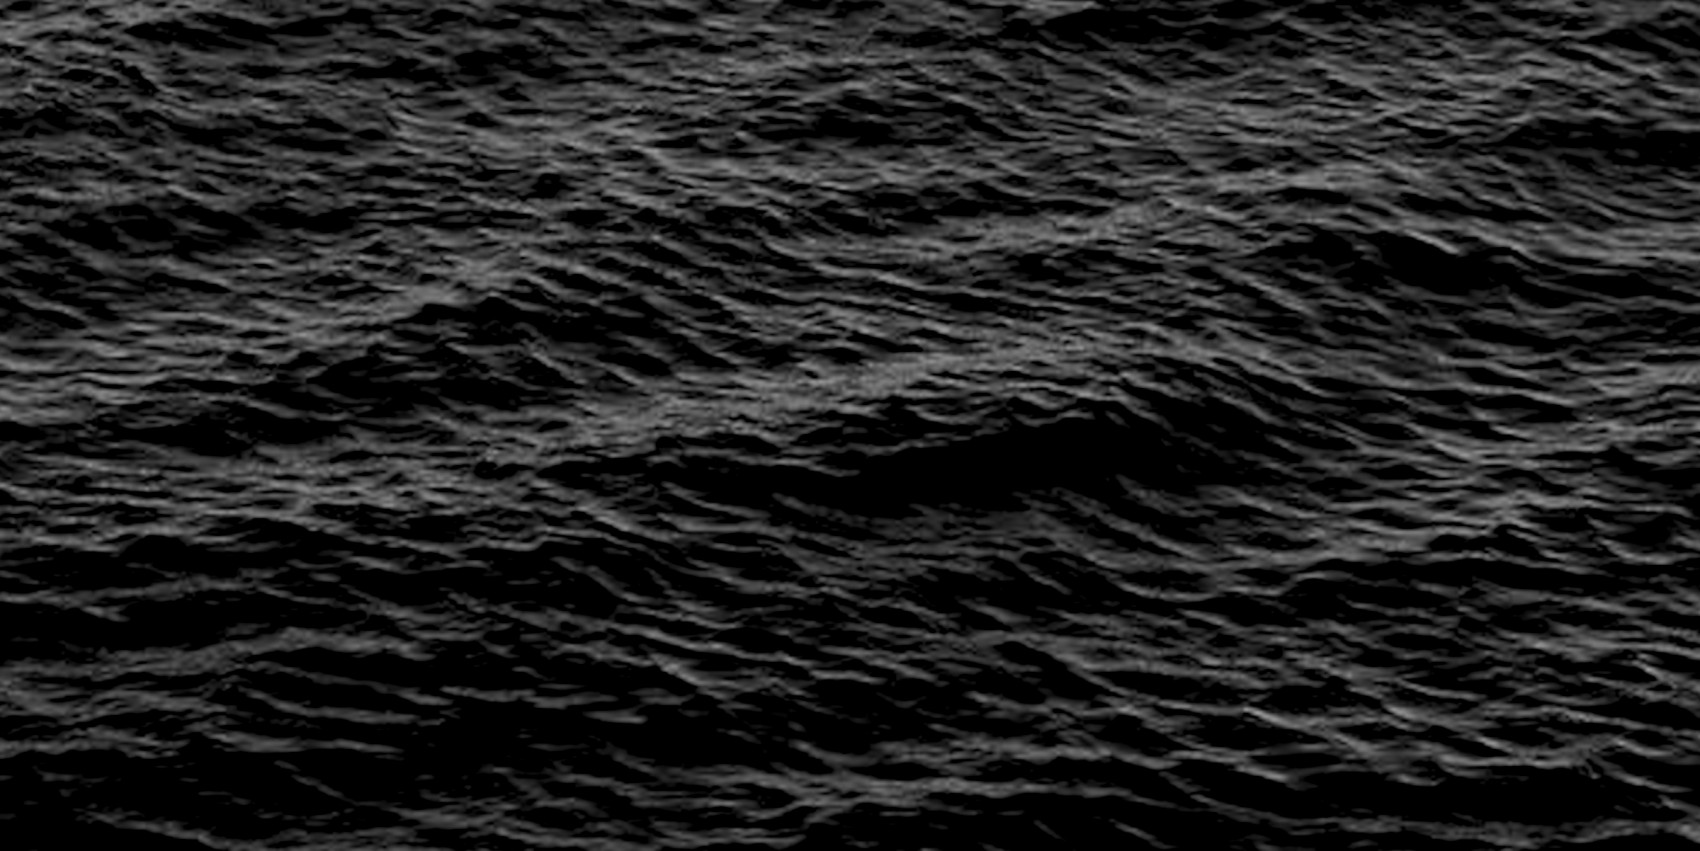 Dark sea with waves and rippled surface